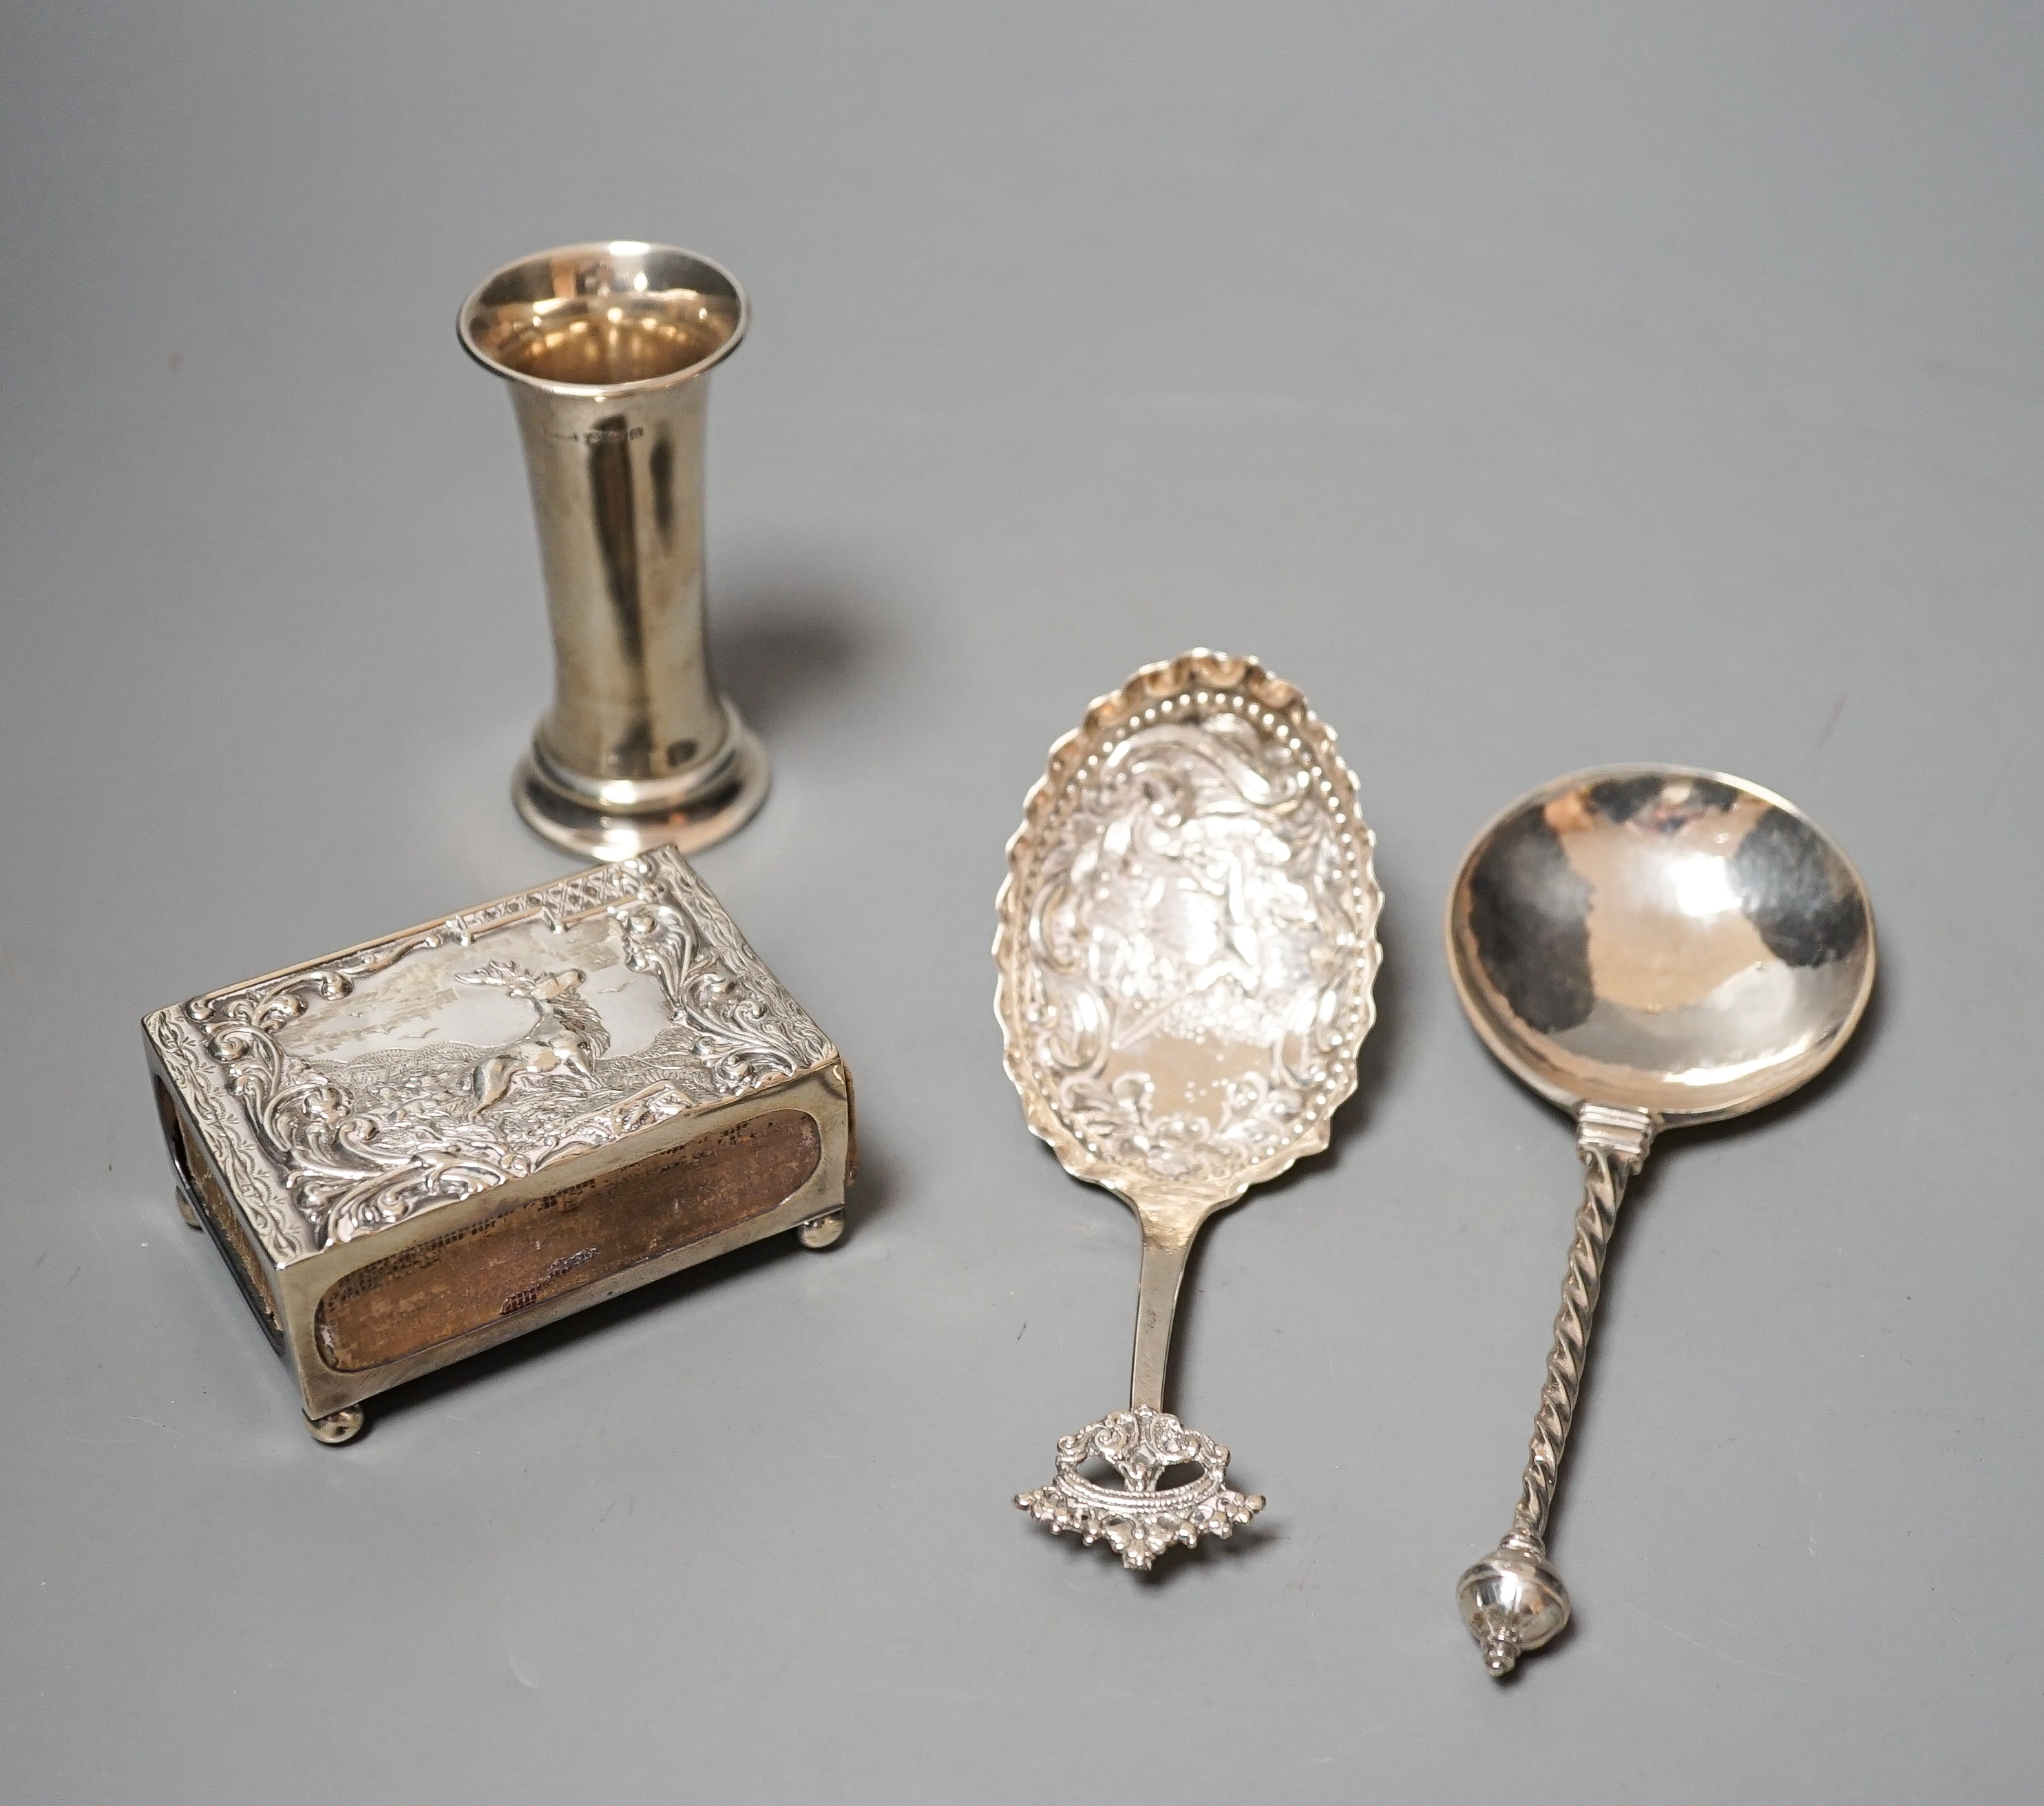 A 19th century Dutch embossed white metal spoon, 13.5cm, one other unmarked white metal spoon, a small silver posy vase and a repousse silver match sleeve.